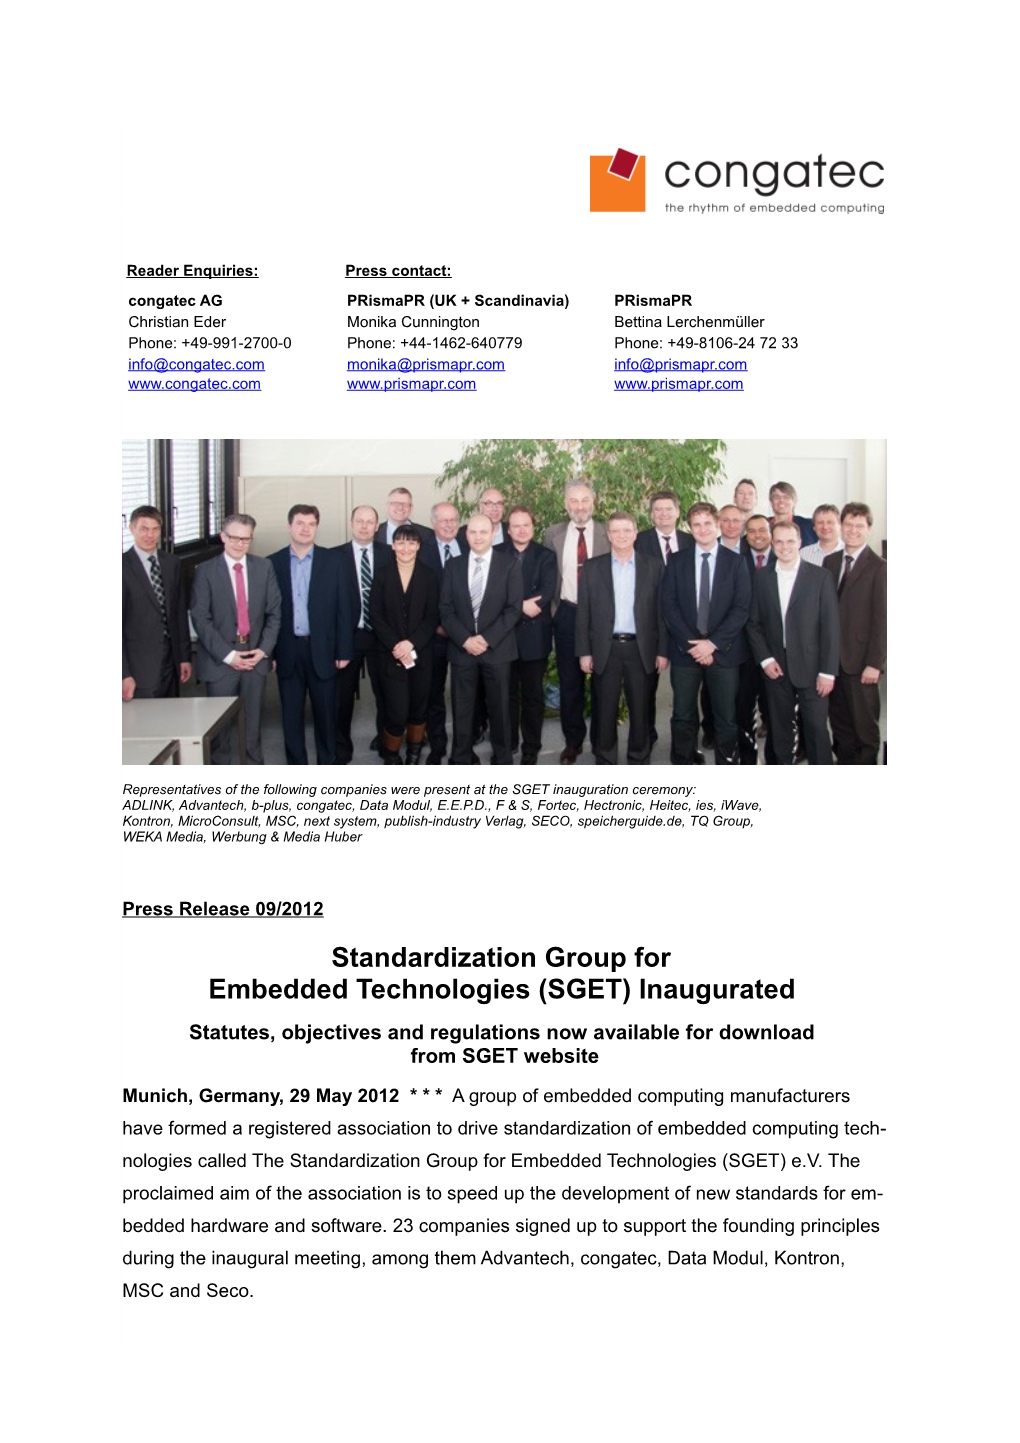 Standardization Group for Embedded Technologies Inaugurated